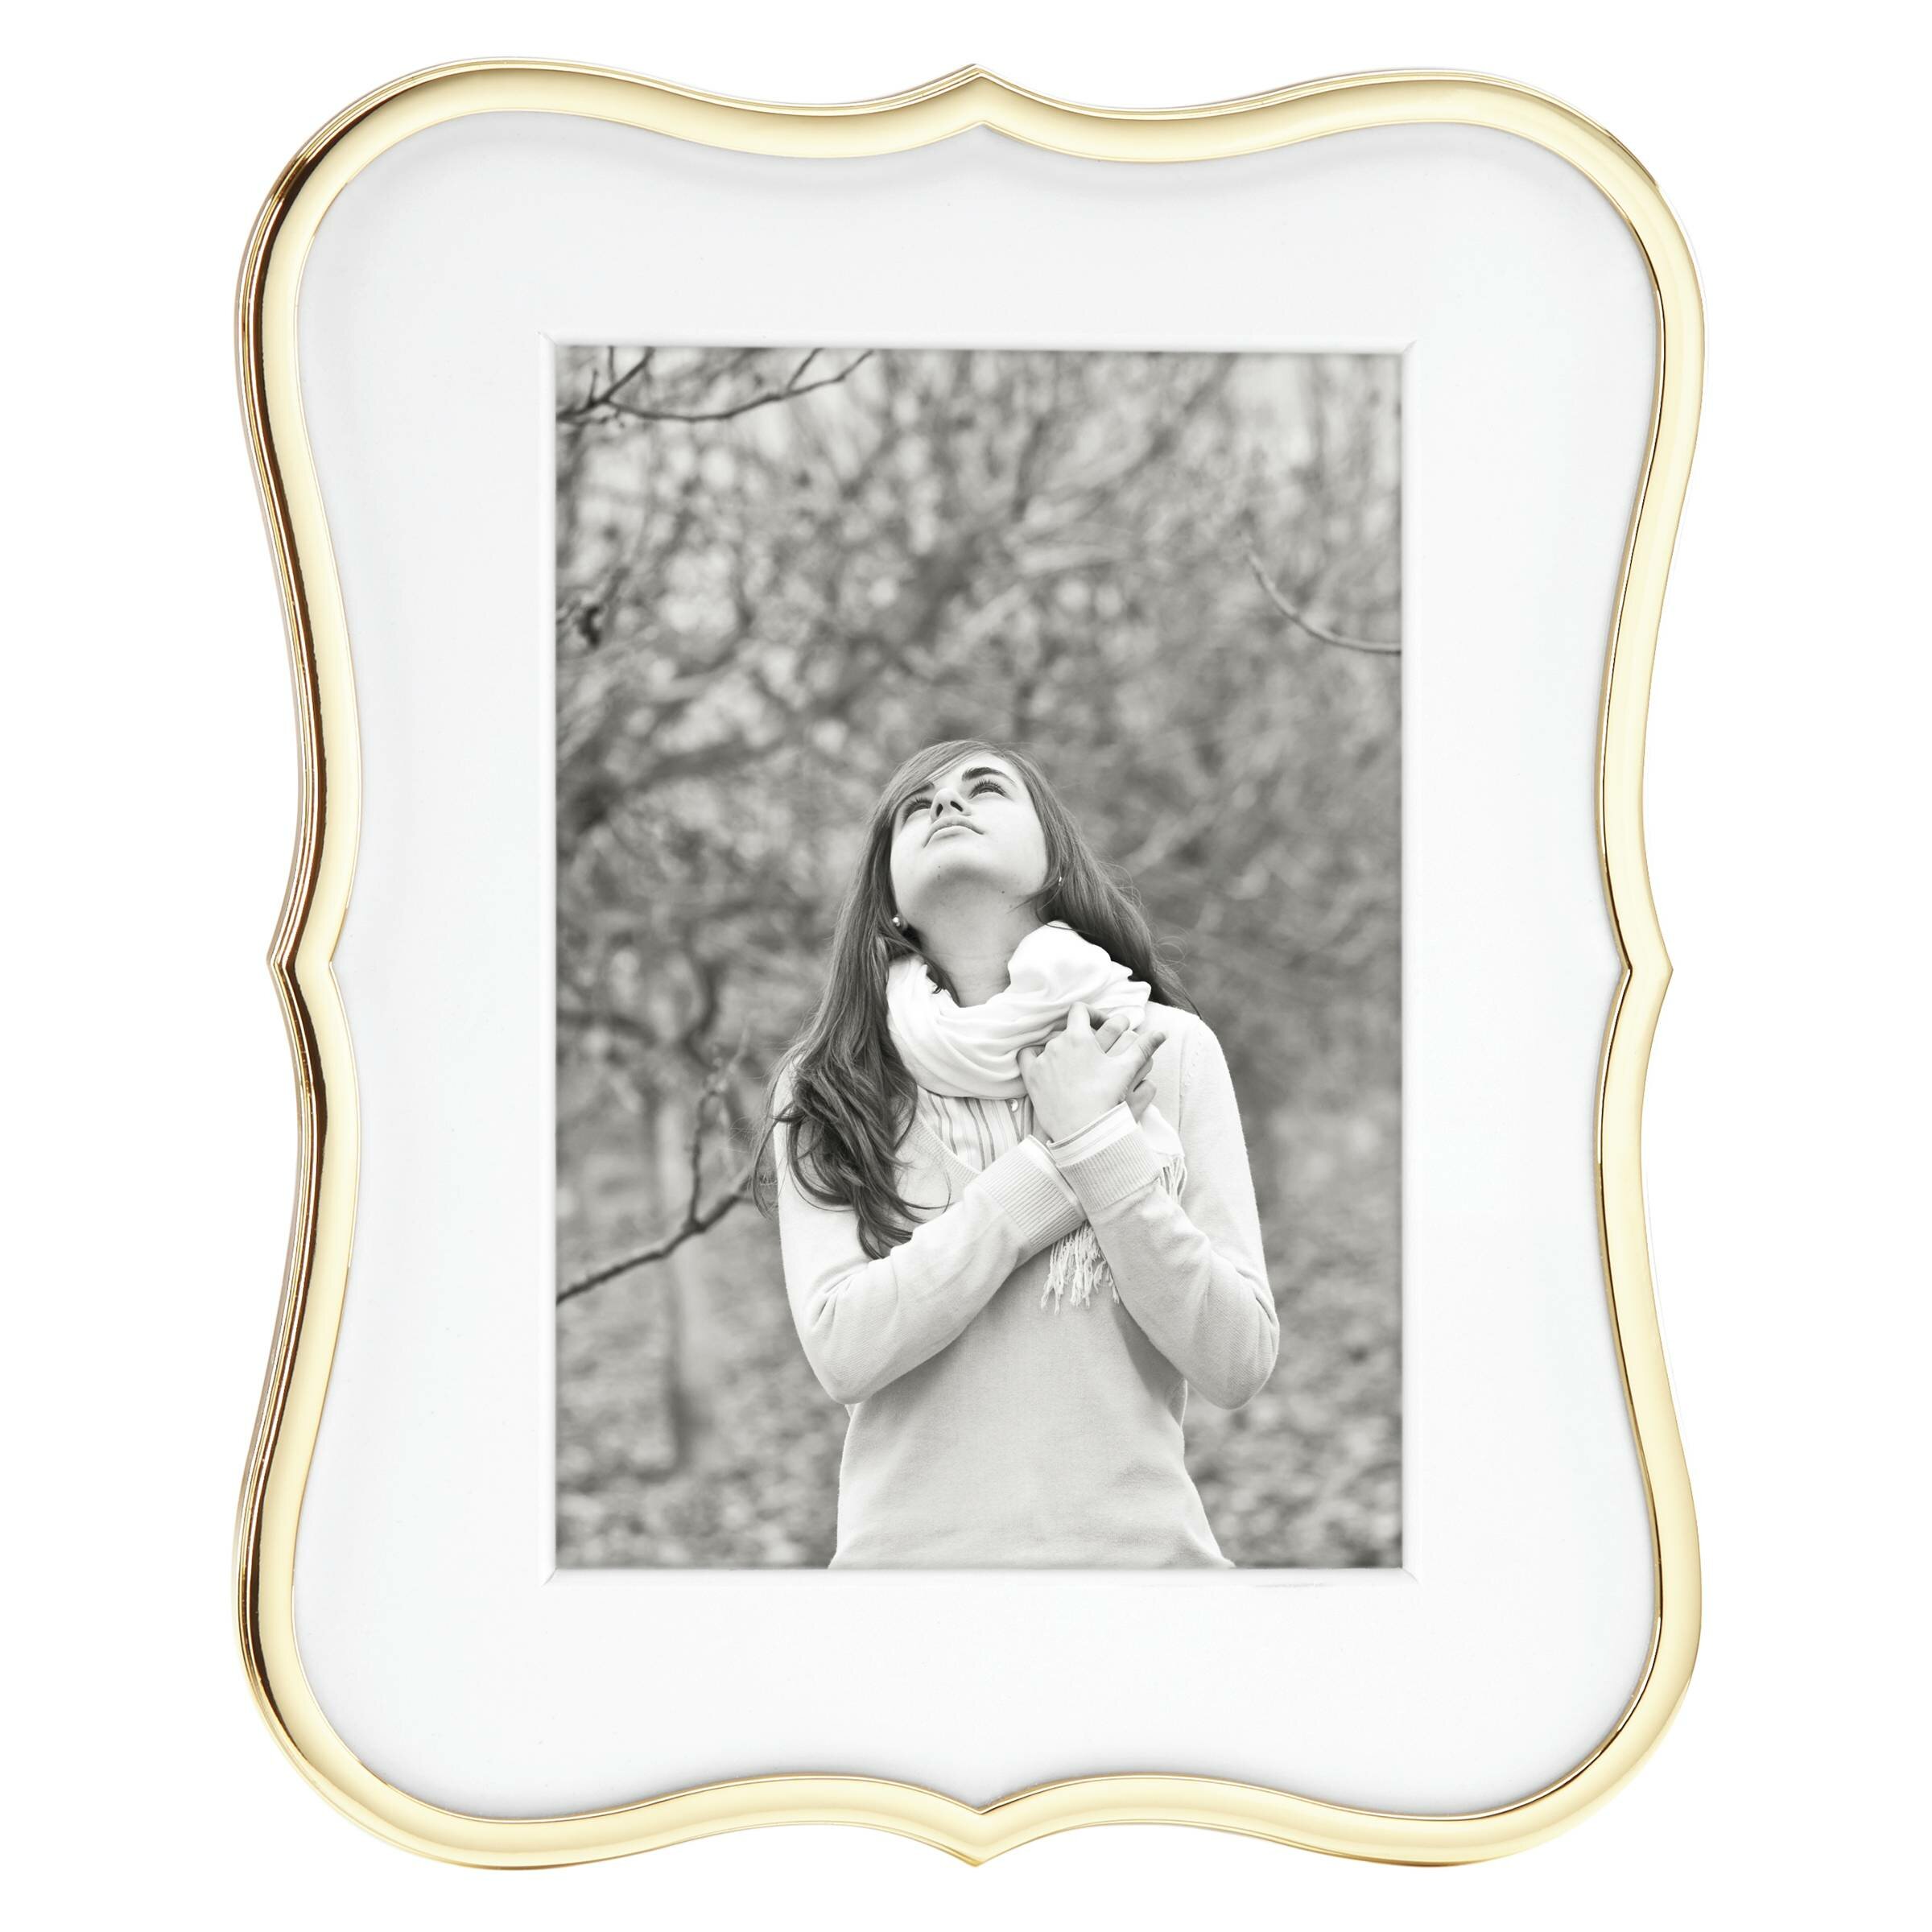 kate spade new york Crown Point™ Picture Frame & Reviews | Wayfair